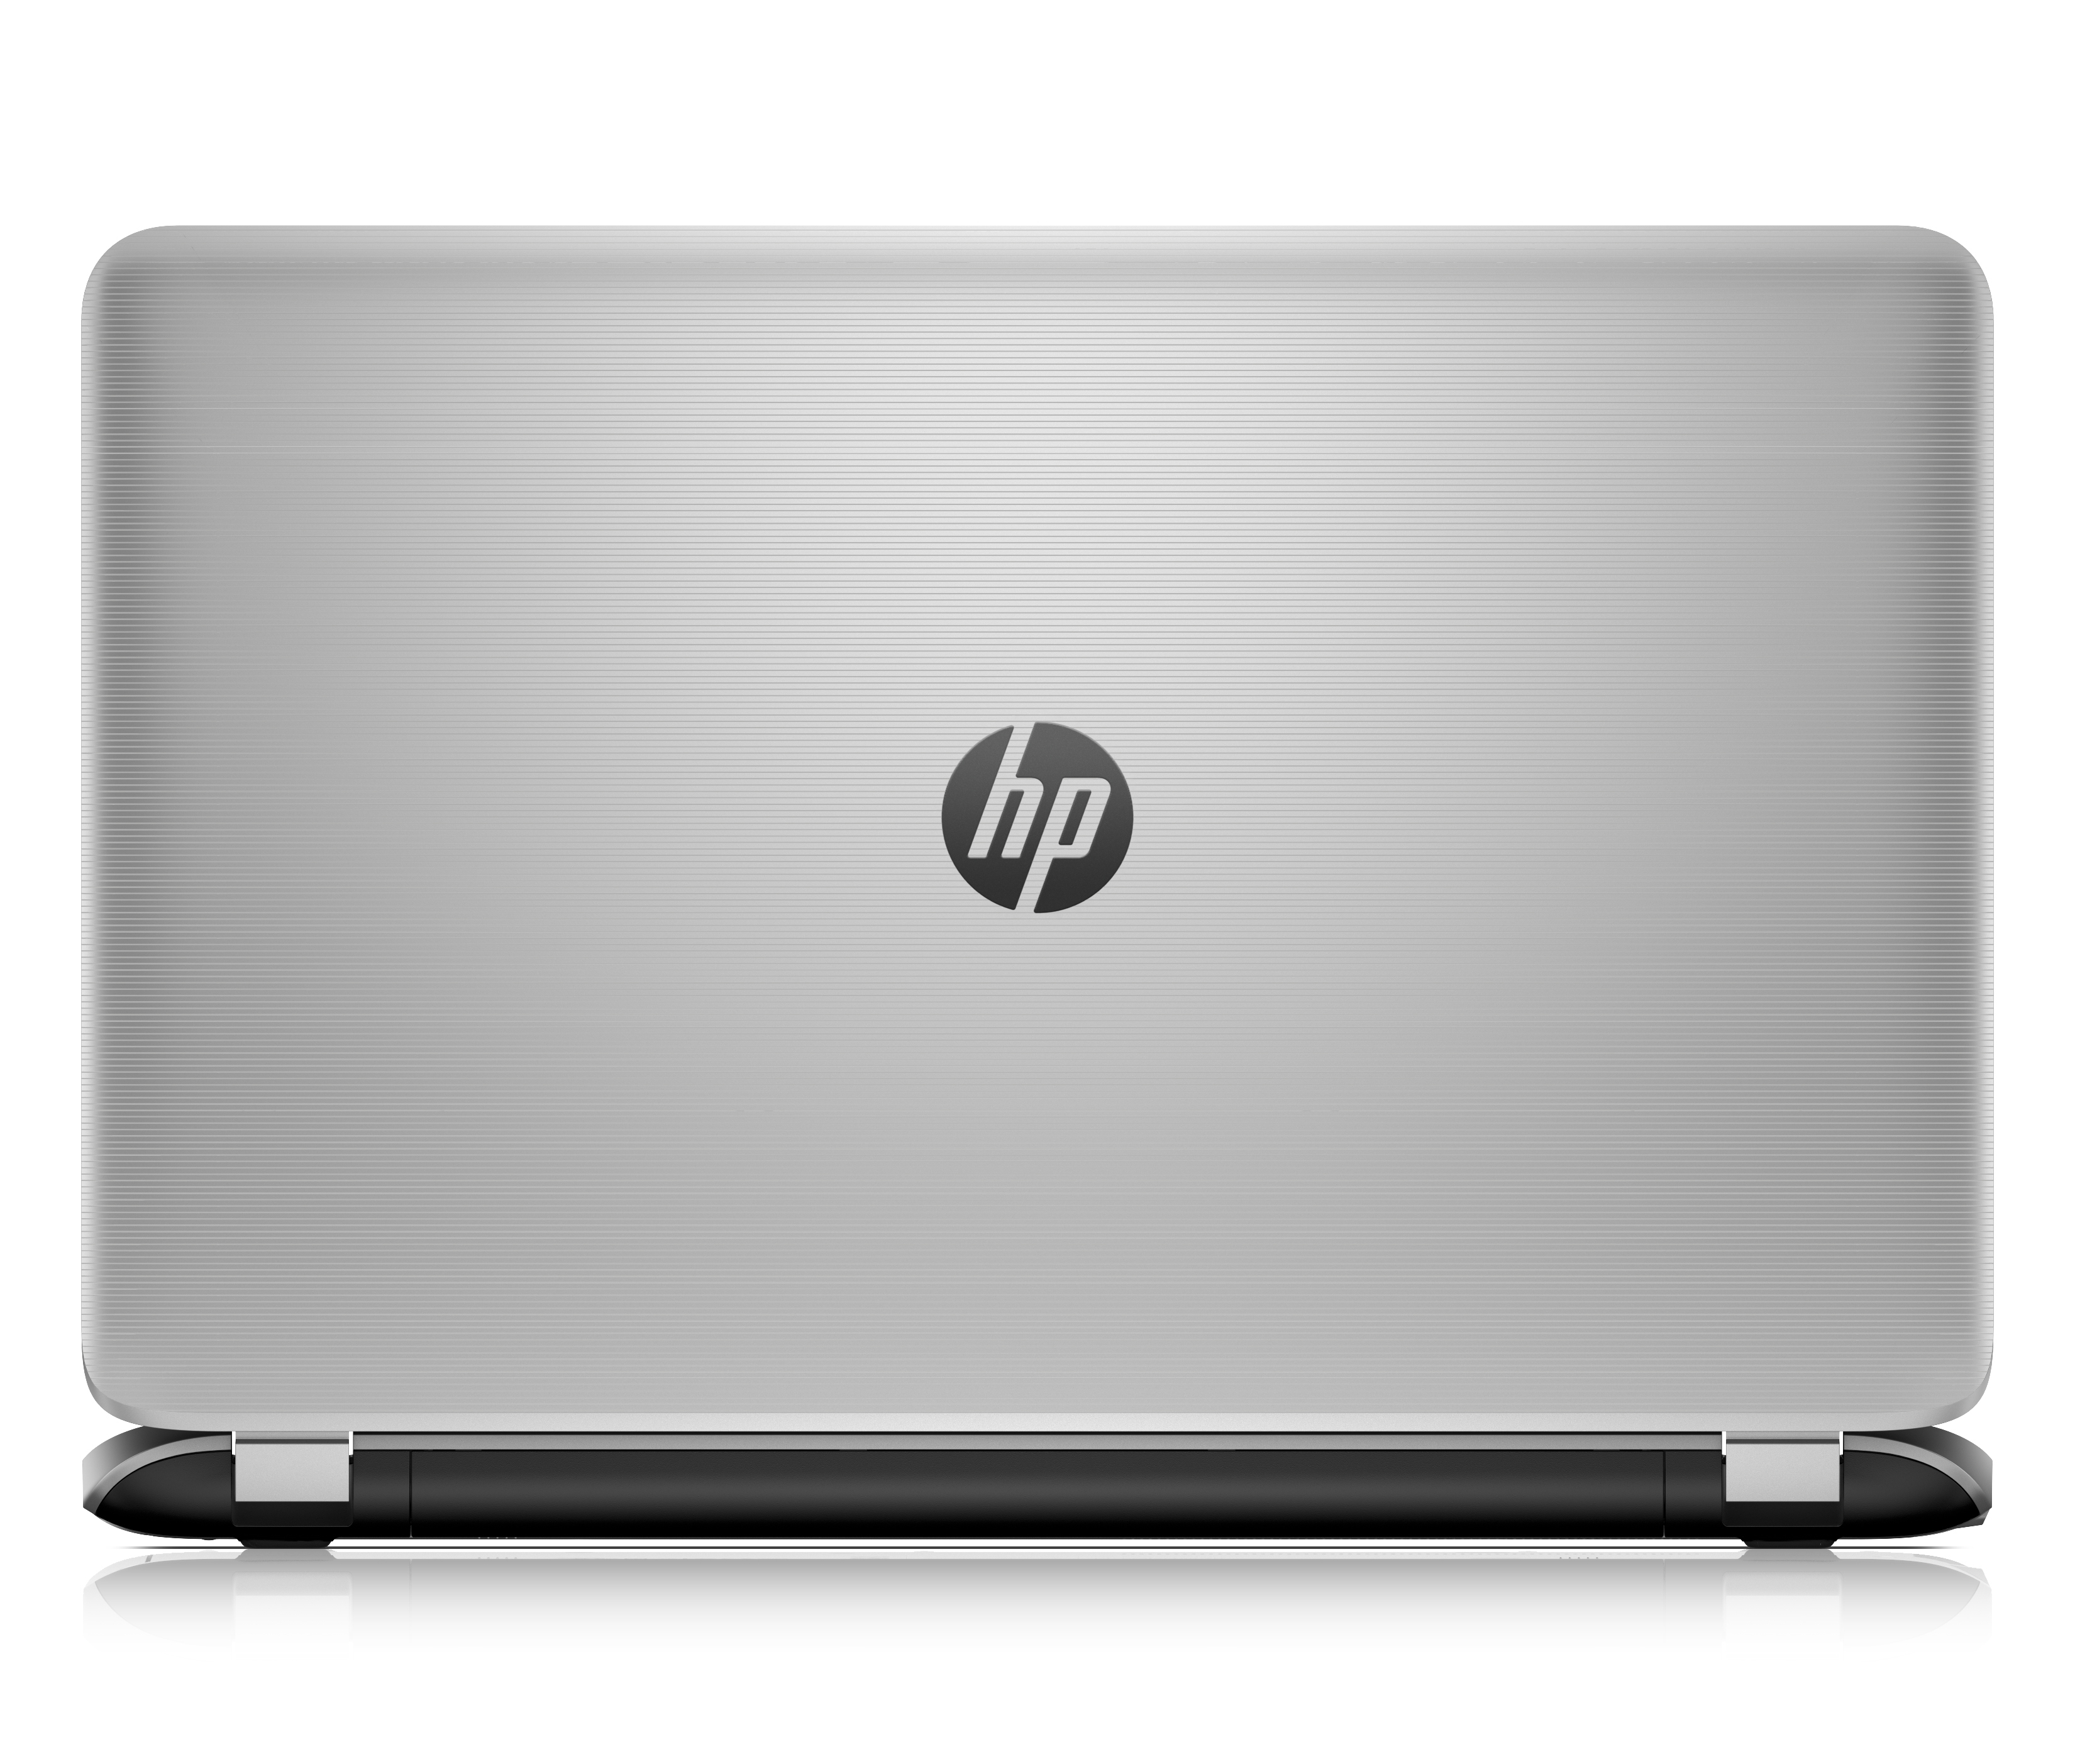 Product data HP ENVY Notebook - 17t-k200 CTO (ENERGY STAR) Notebooks ...